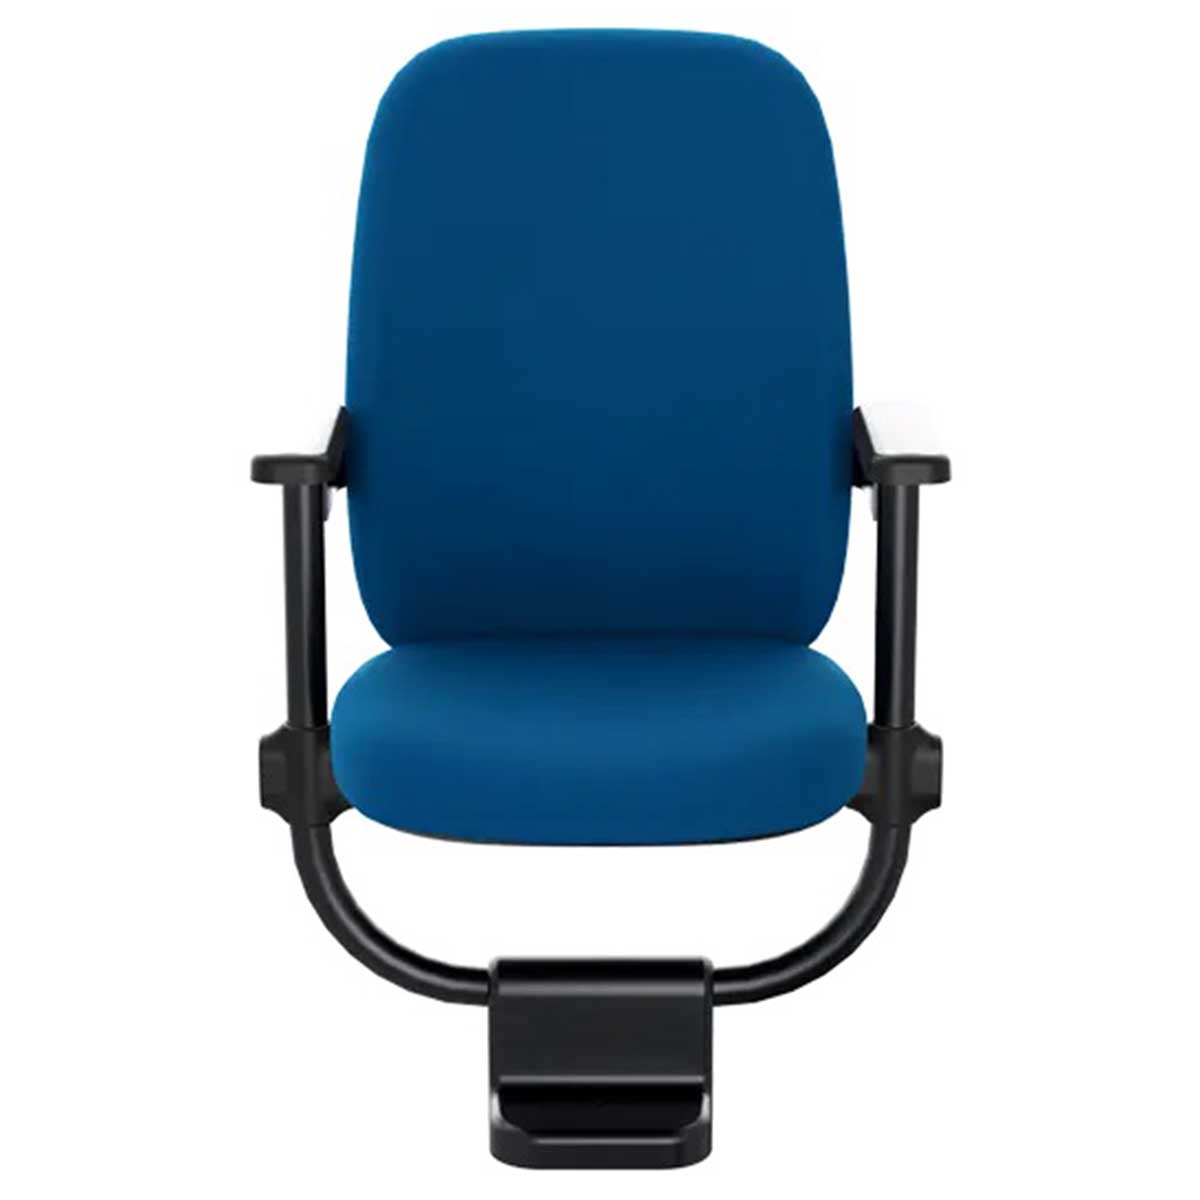 Push Back Chair Manufacturers, Suppliers in South Extension Part 2